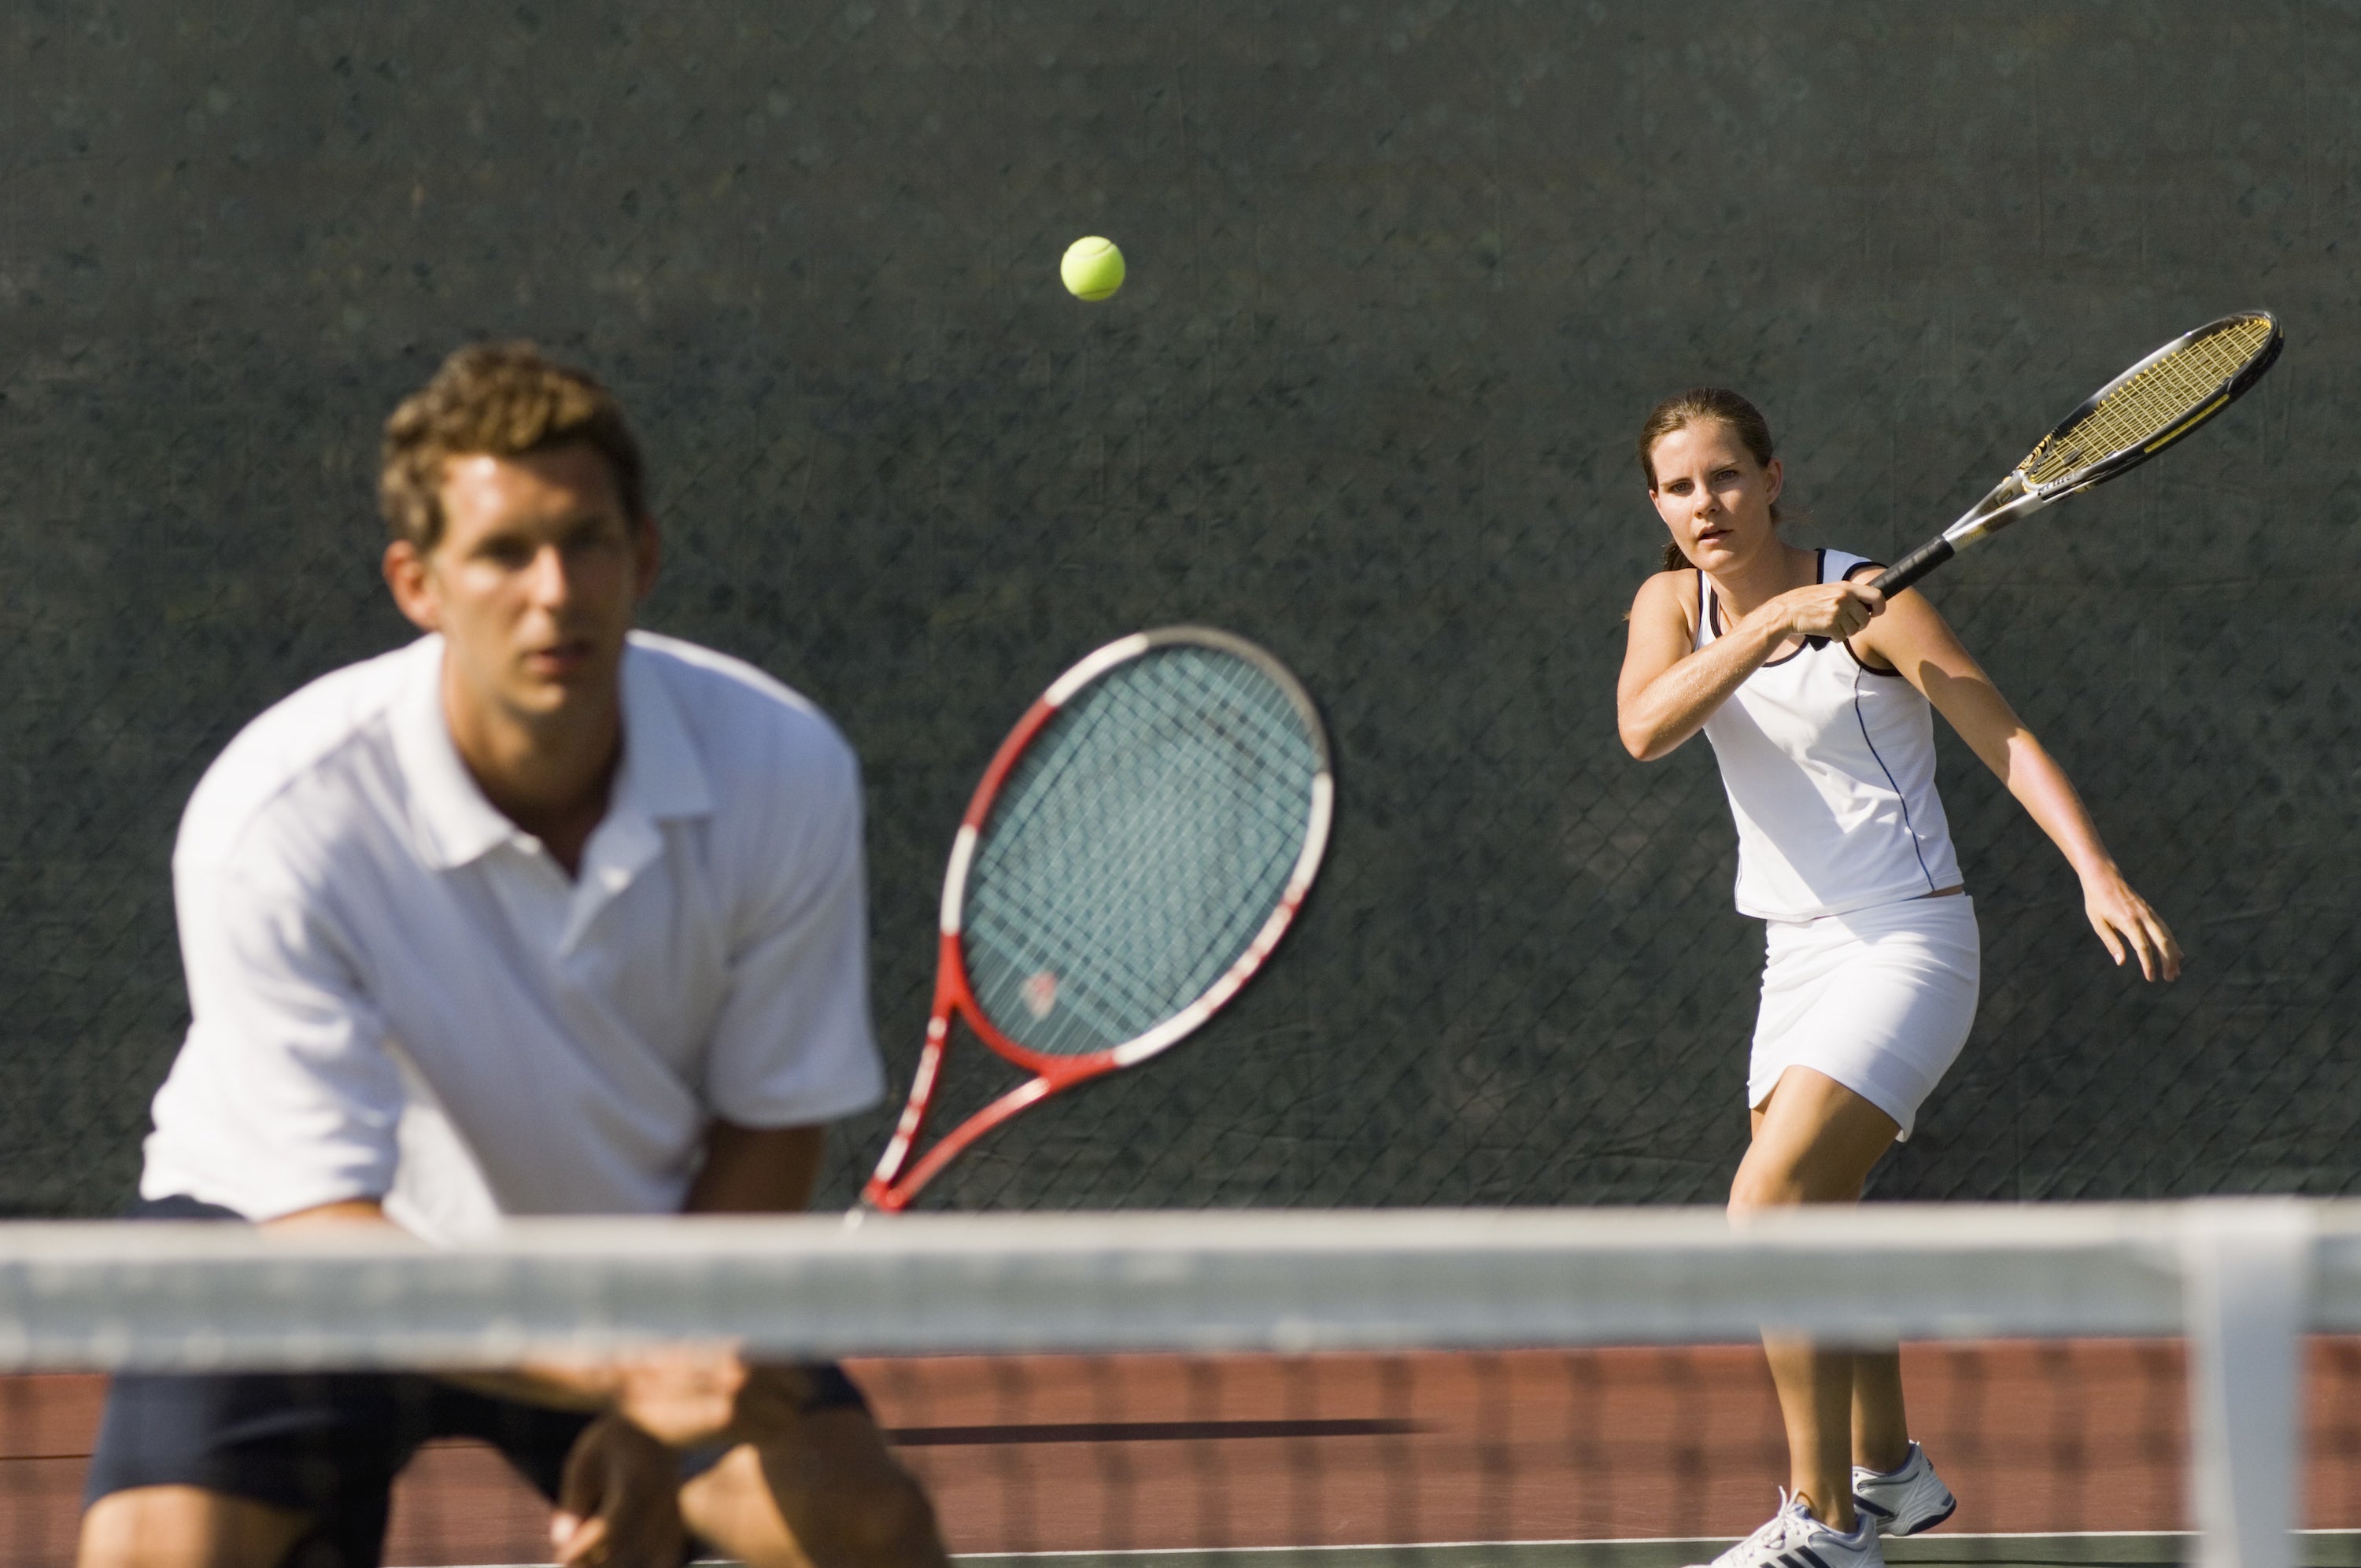 Man and woman playing doubles tennis